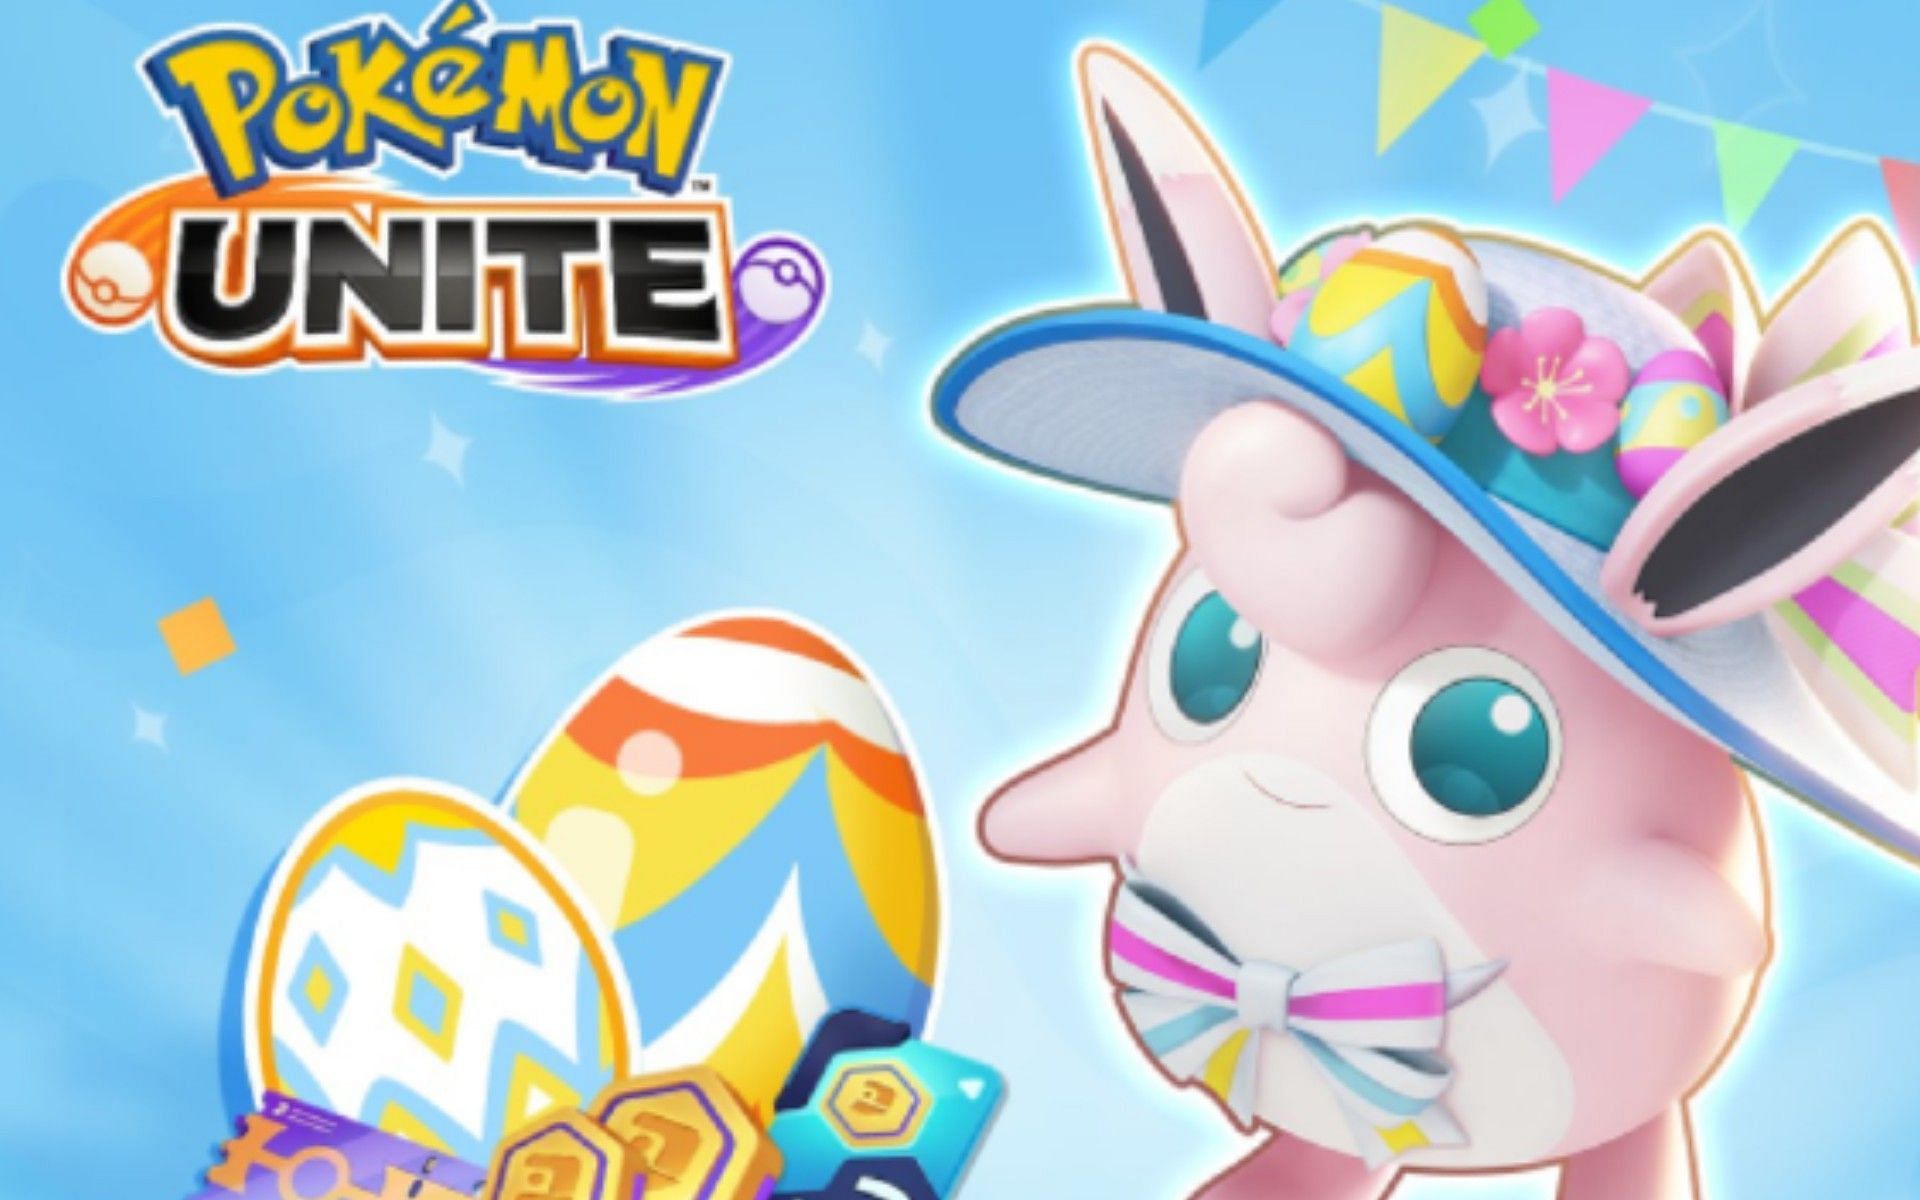 Players can earn eggs during the Easter event in Pokemon Unite (Image via Nintendo)